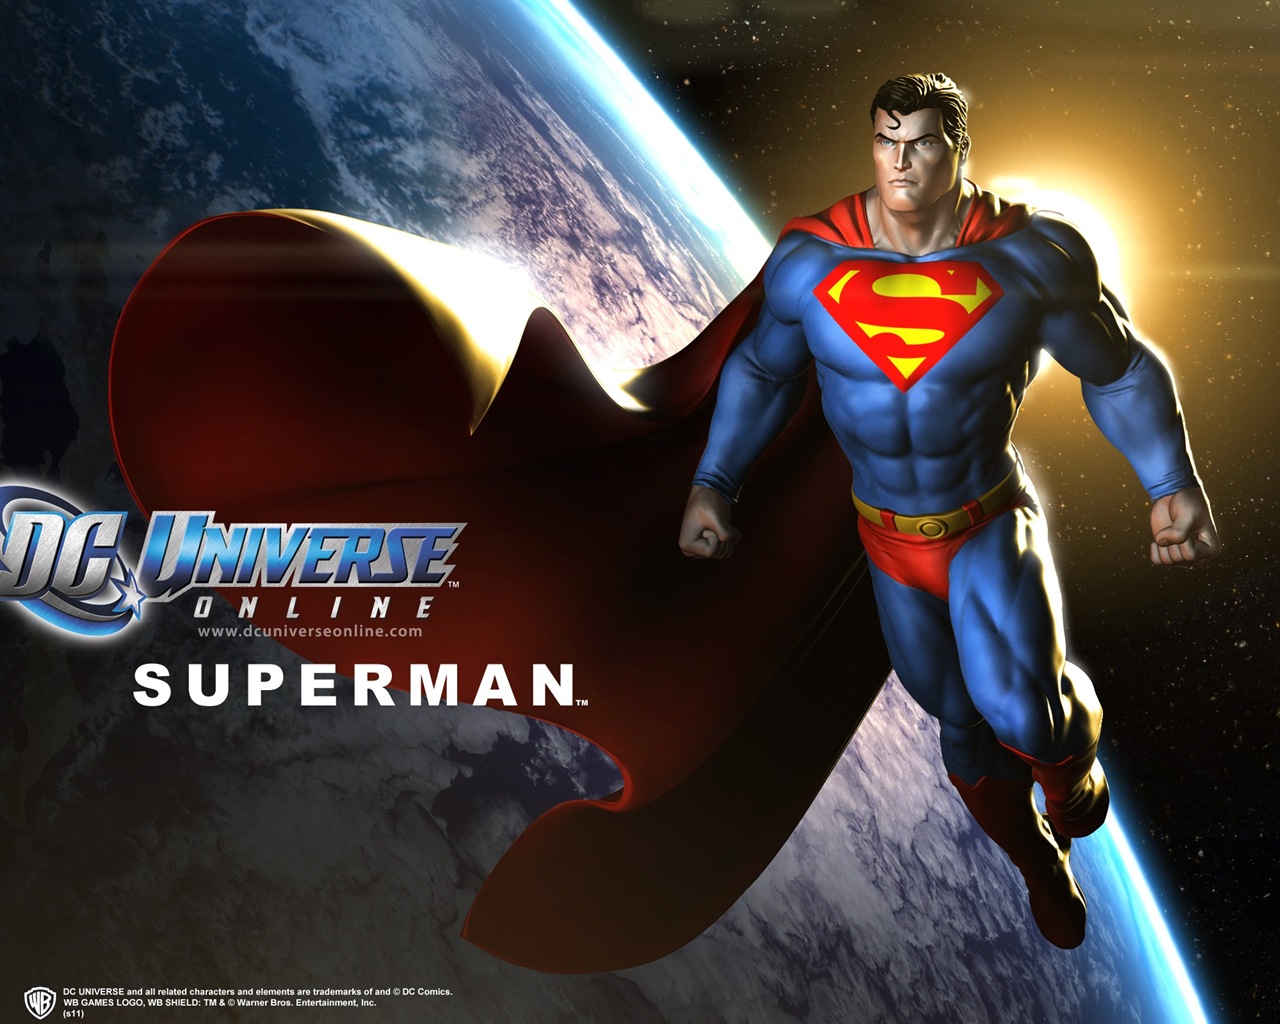 DC Universe Online HD game wallpapers #9 - 1280x1024